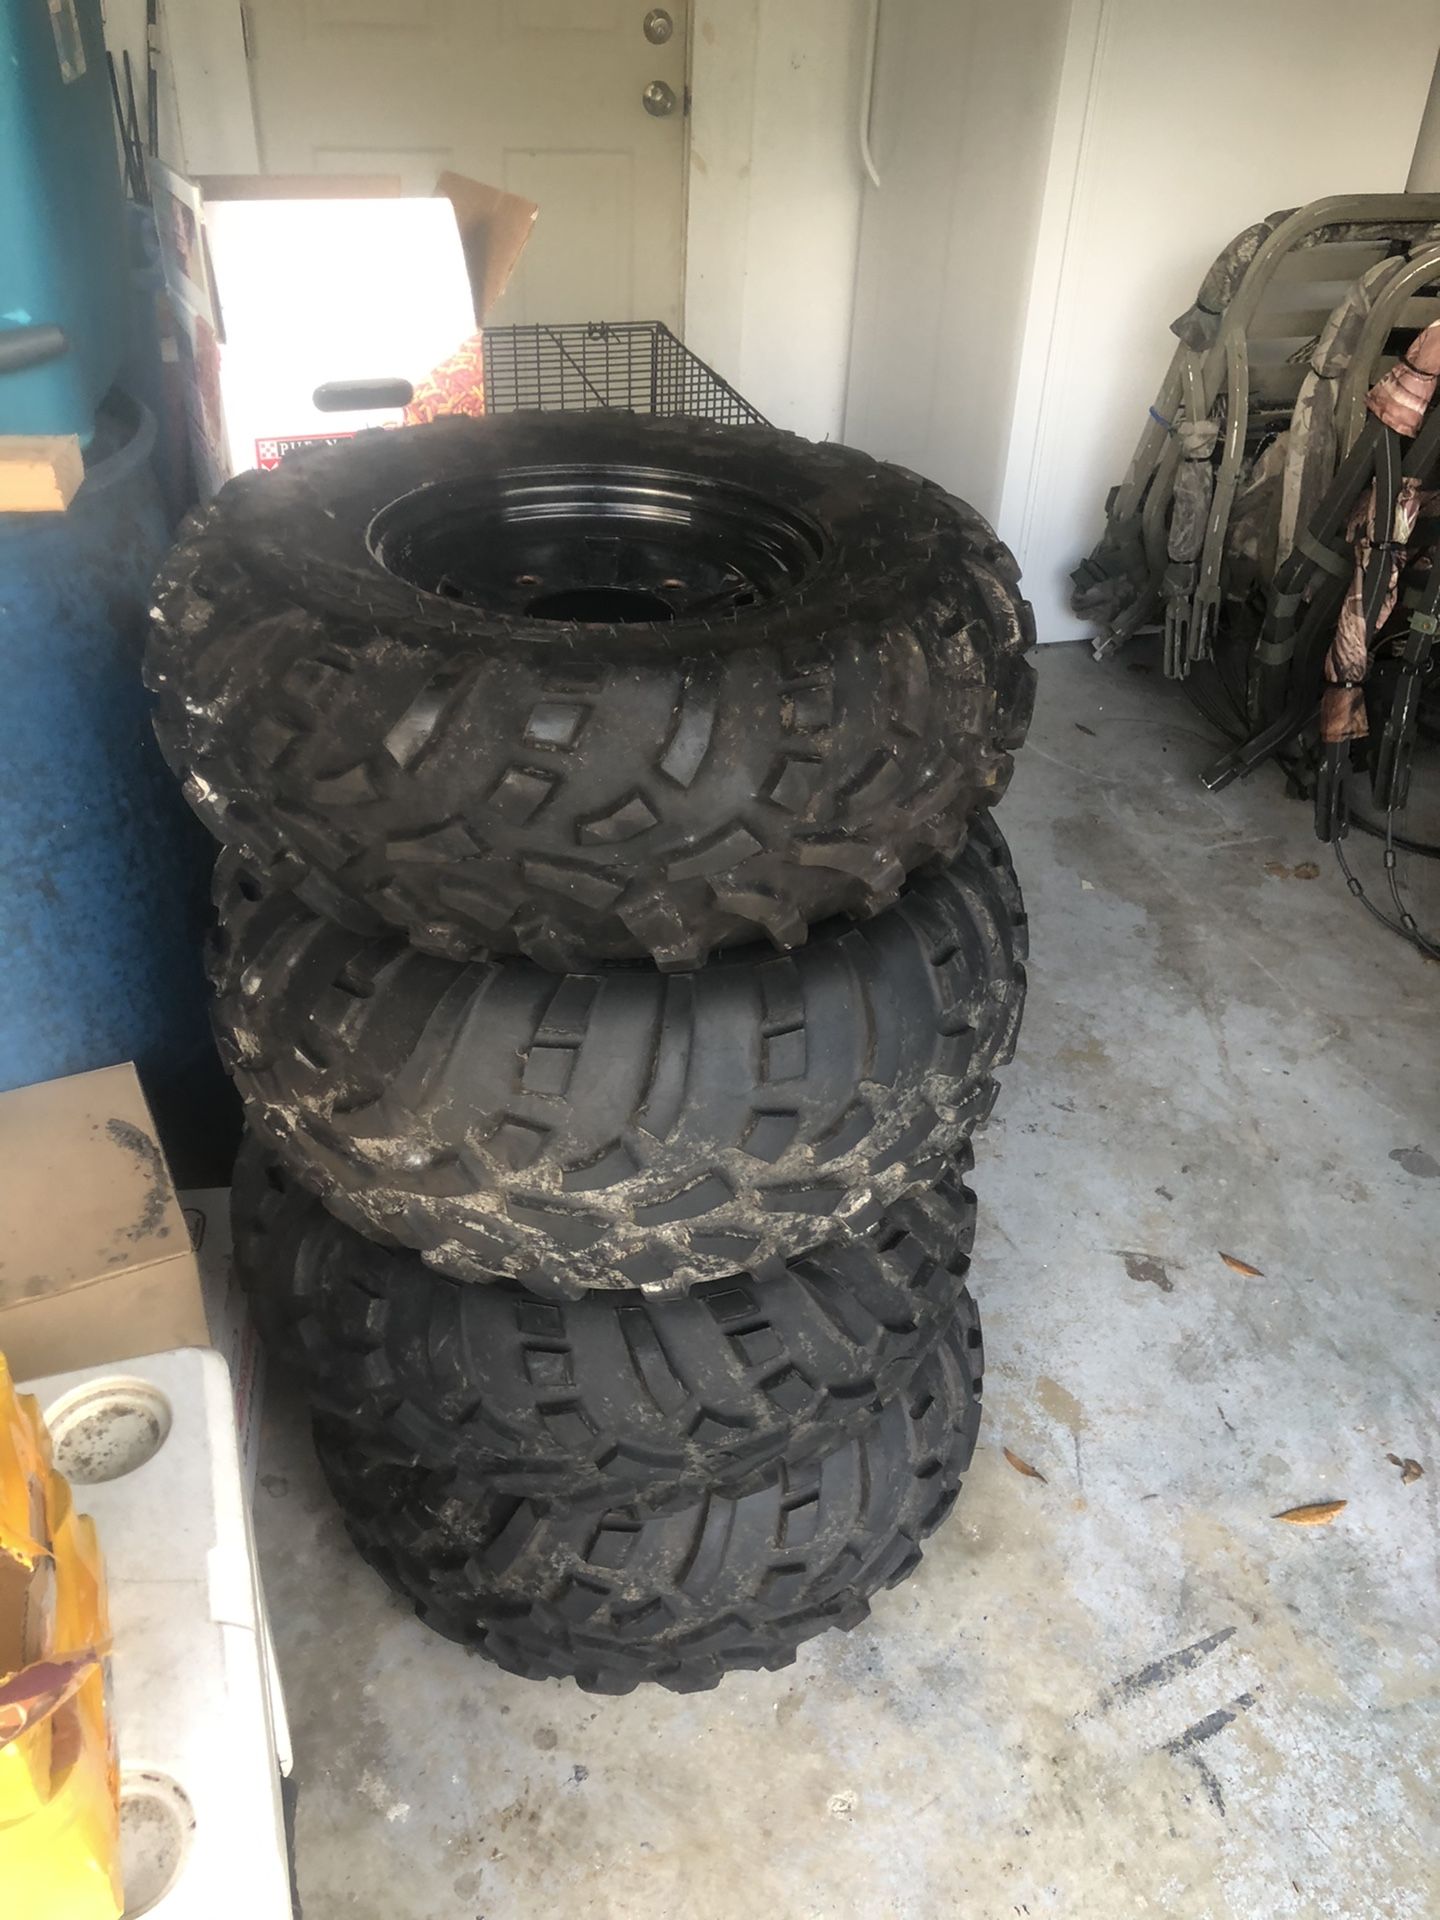 Polaris side by side stock tires